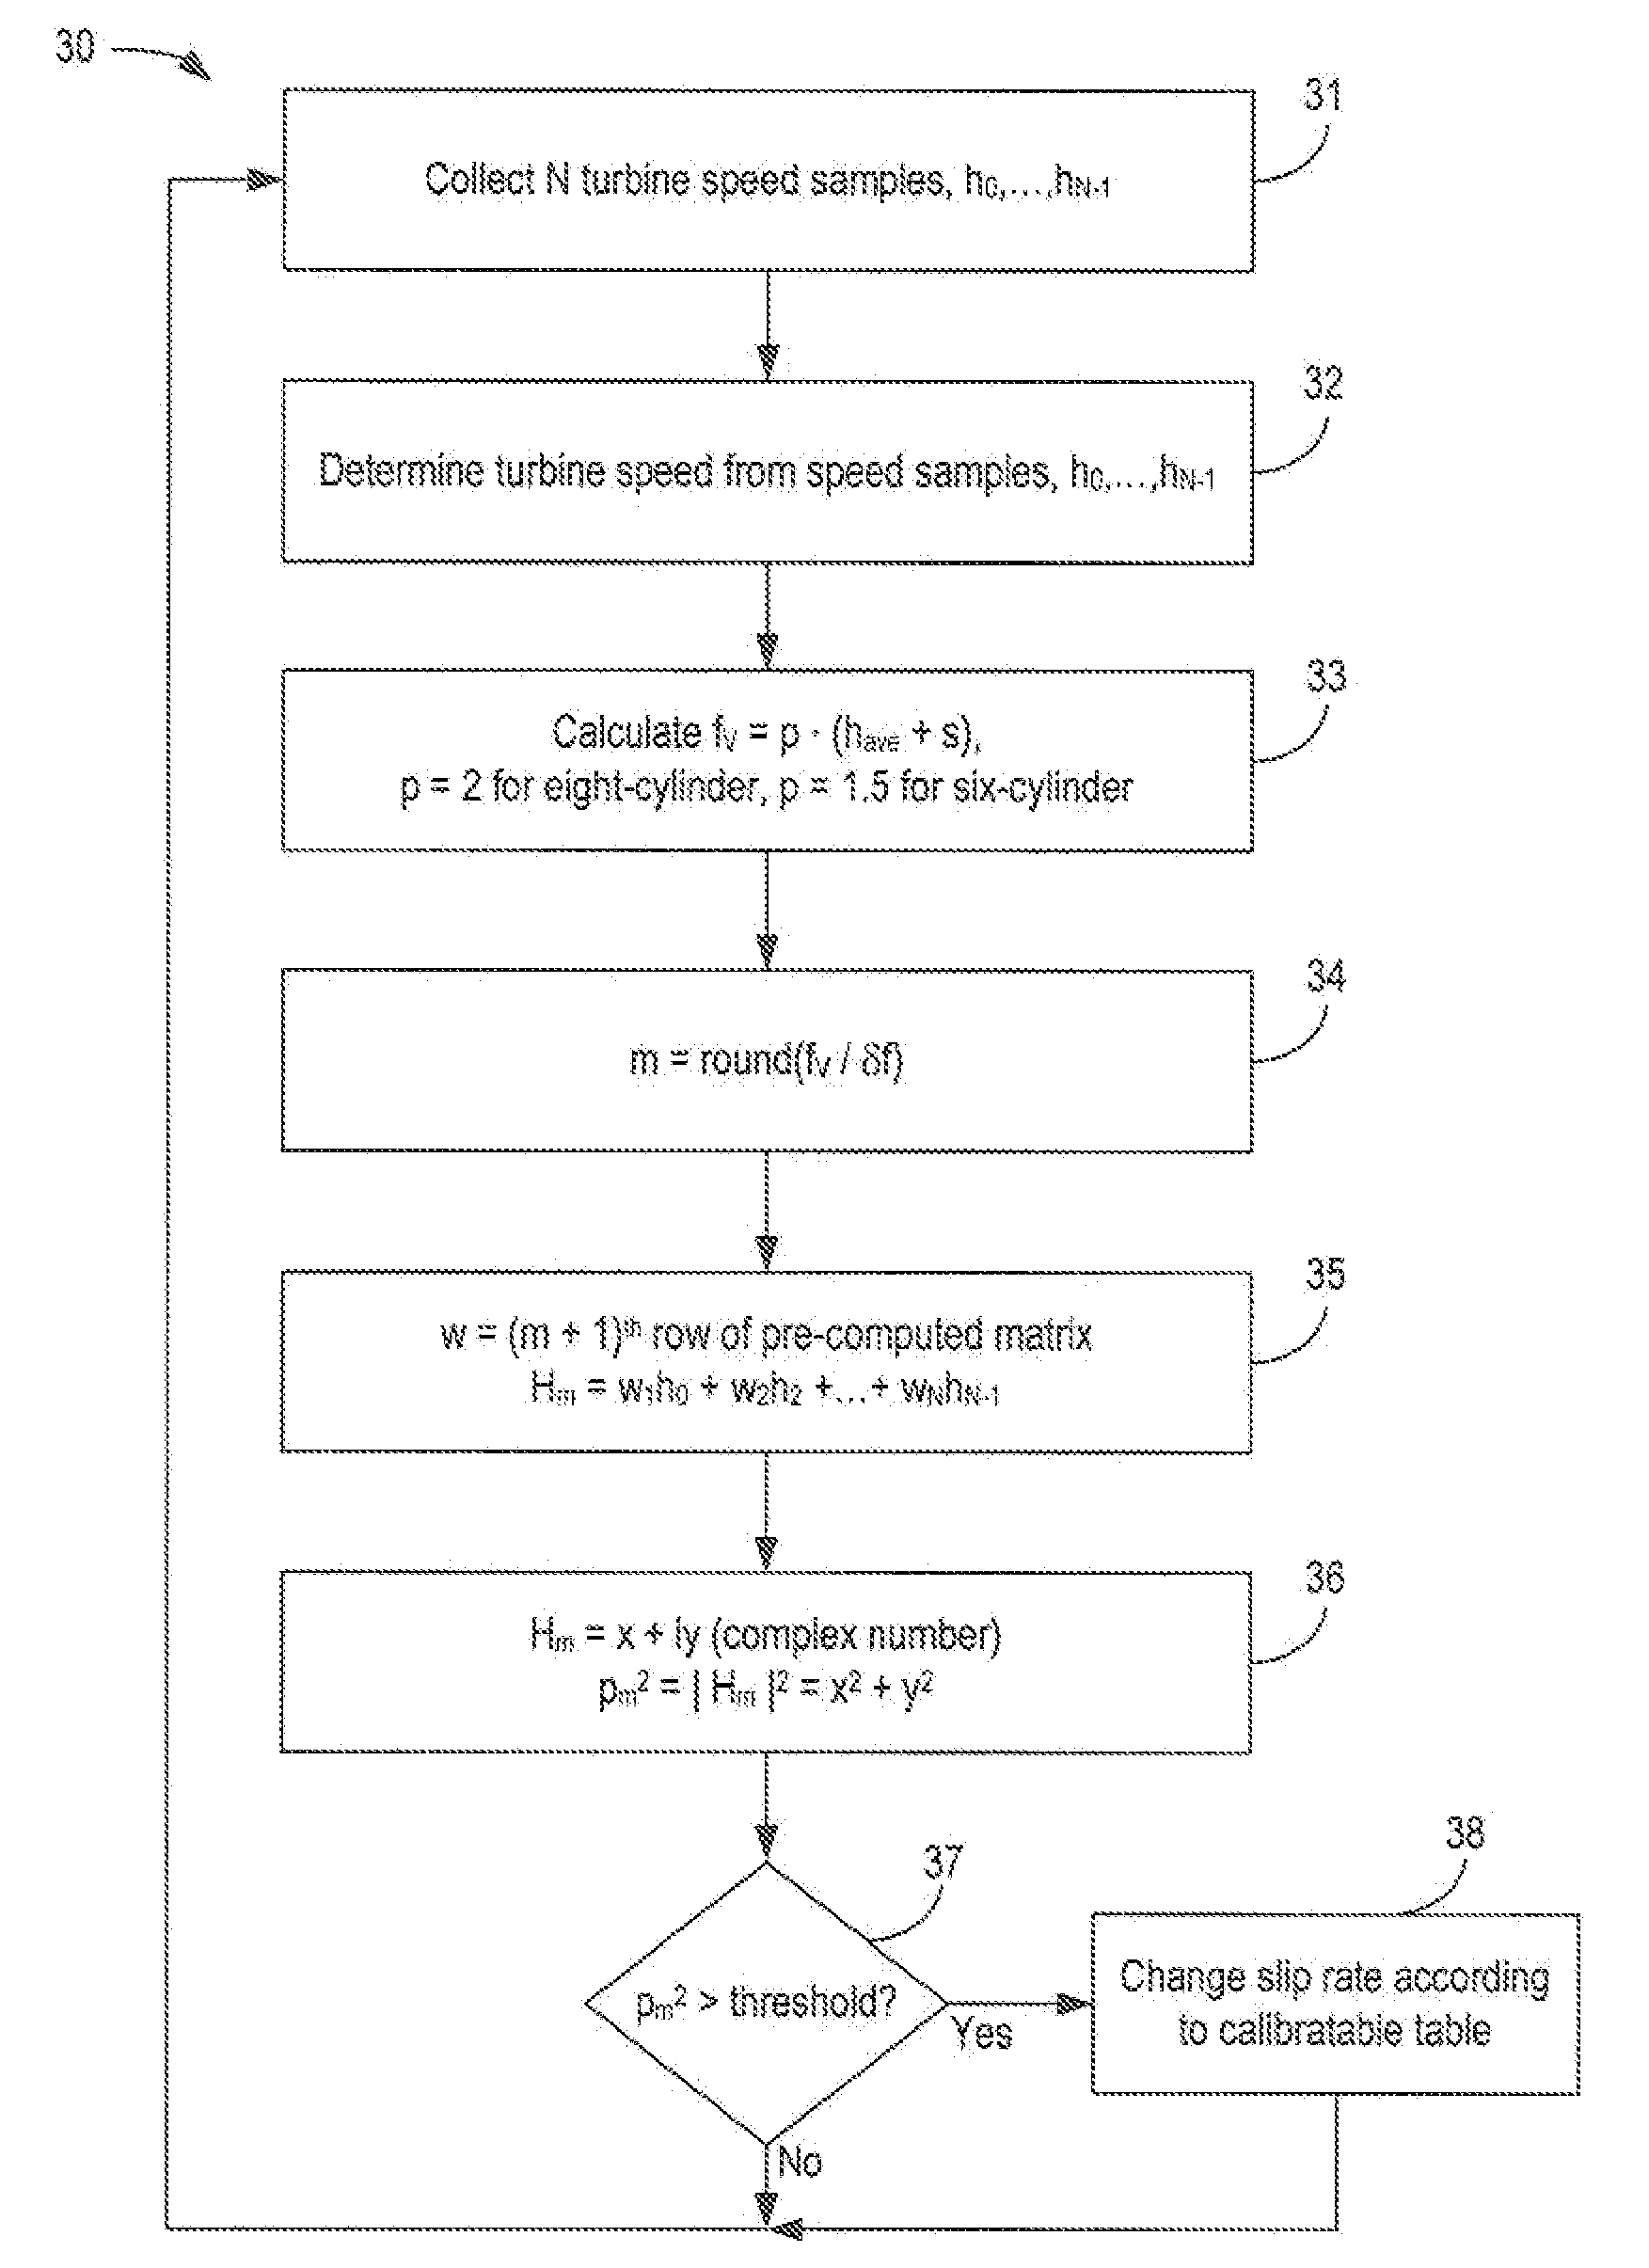 Systems and methods for detecting and reducing high driveline torsional levels in automobile transmissions